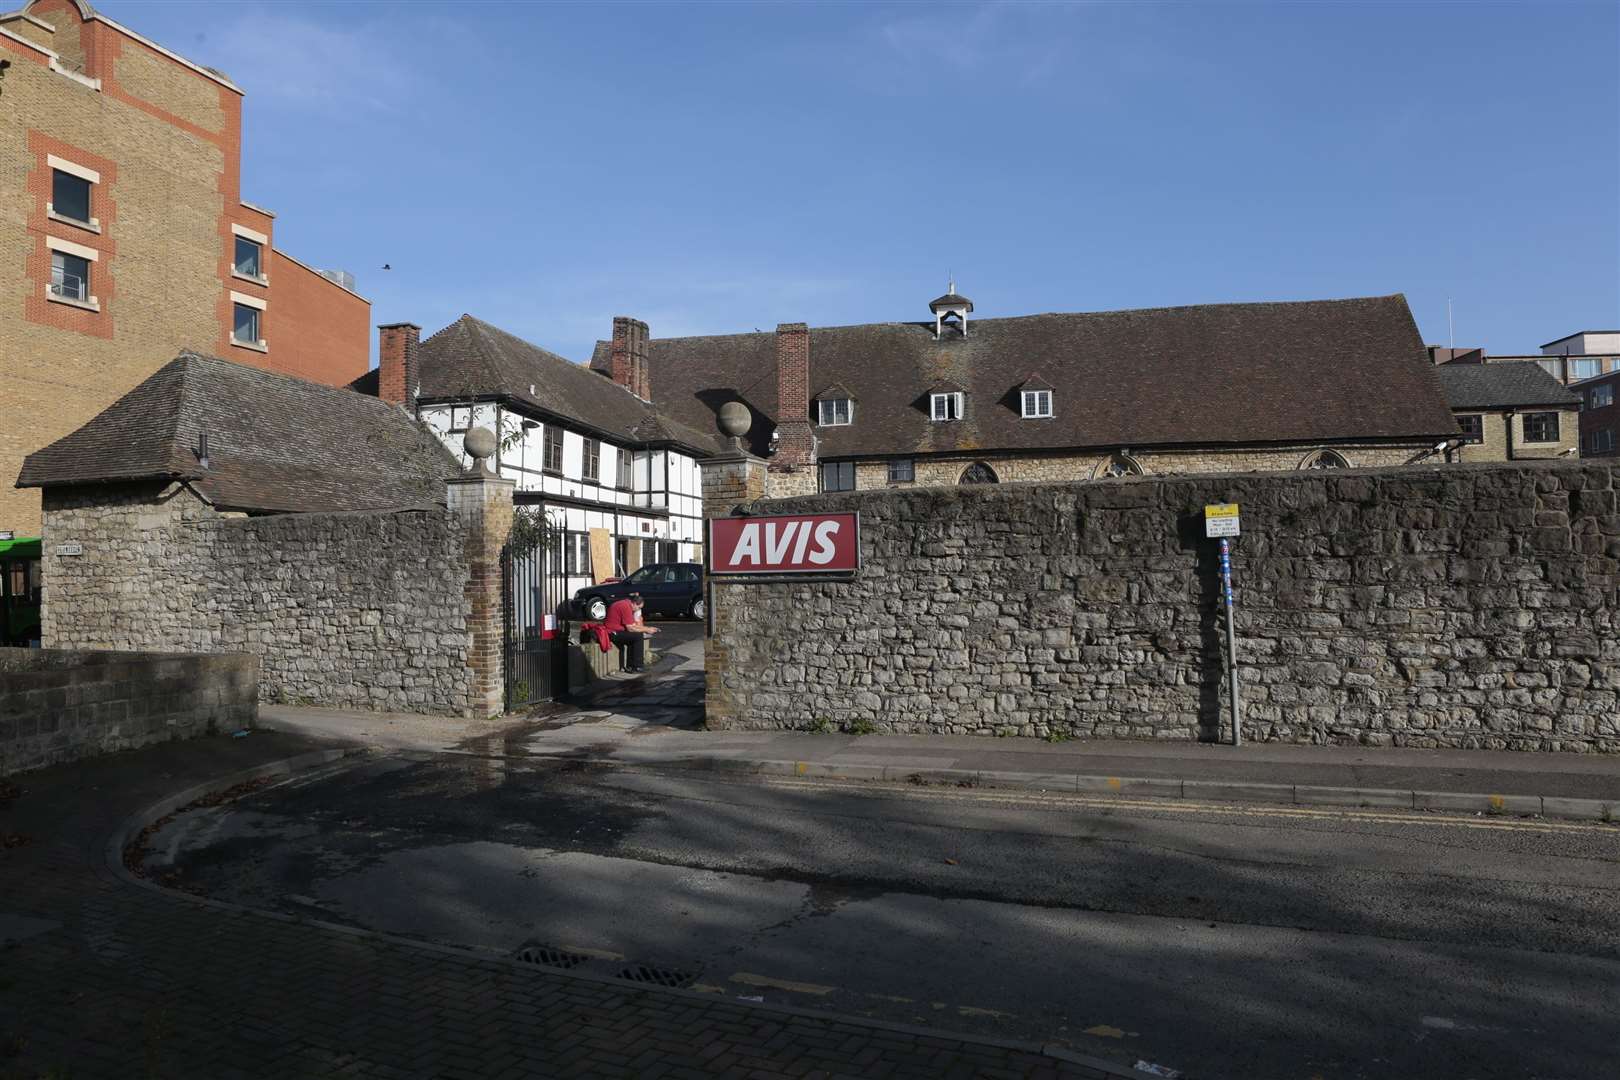 The Grade-II listed building even hosted a car rental centre. The medieval hall is a former site of Maidstone Grammar School